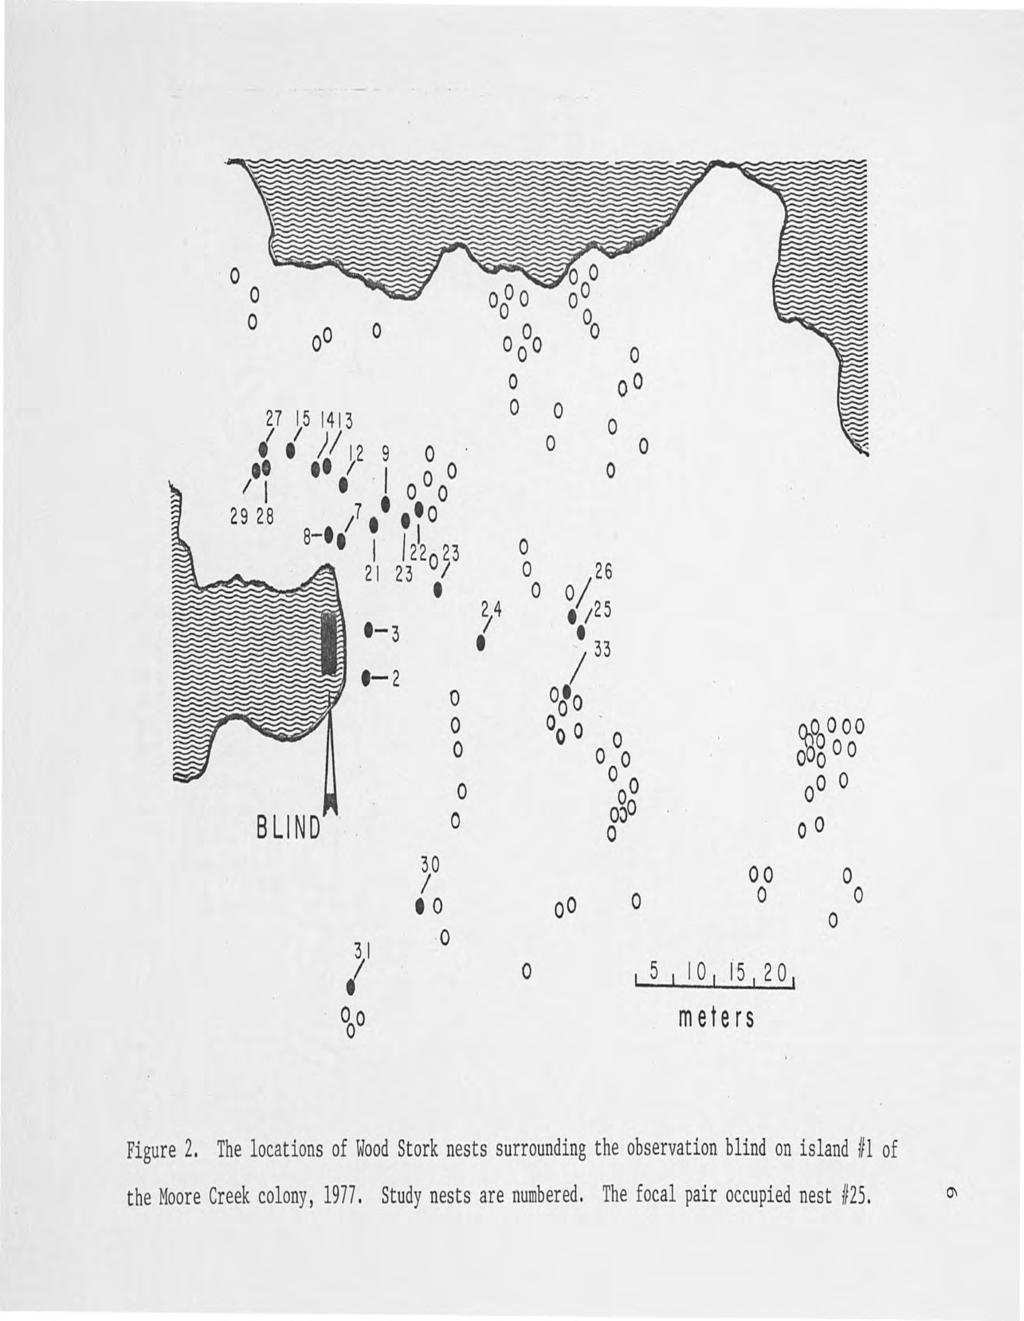 <bo o oo ooo o o o o Figure 2. The locations of Wood Stork nests surrounding the observation blind on island #1 of the Moore Creek colony, 1977. Study nests are numbered.